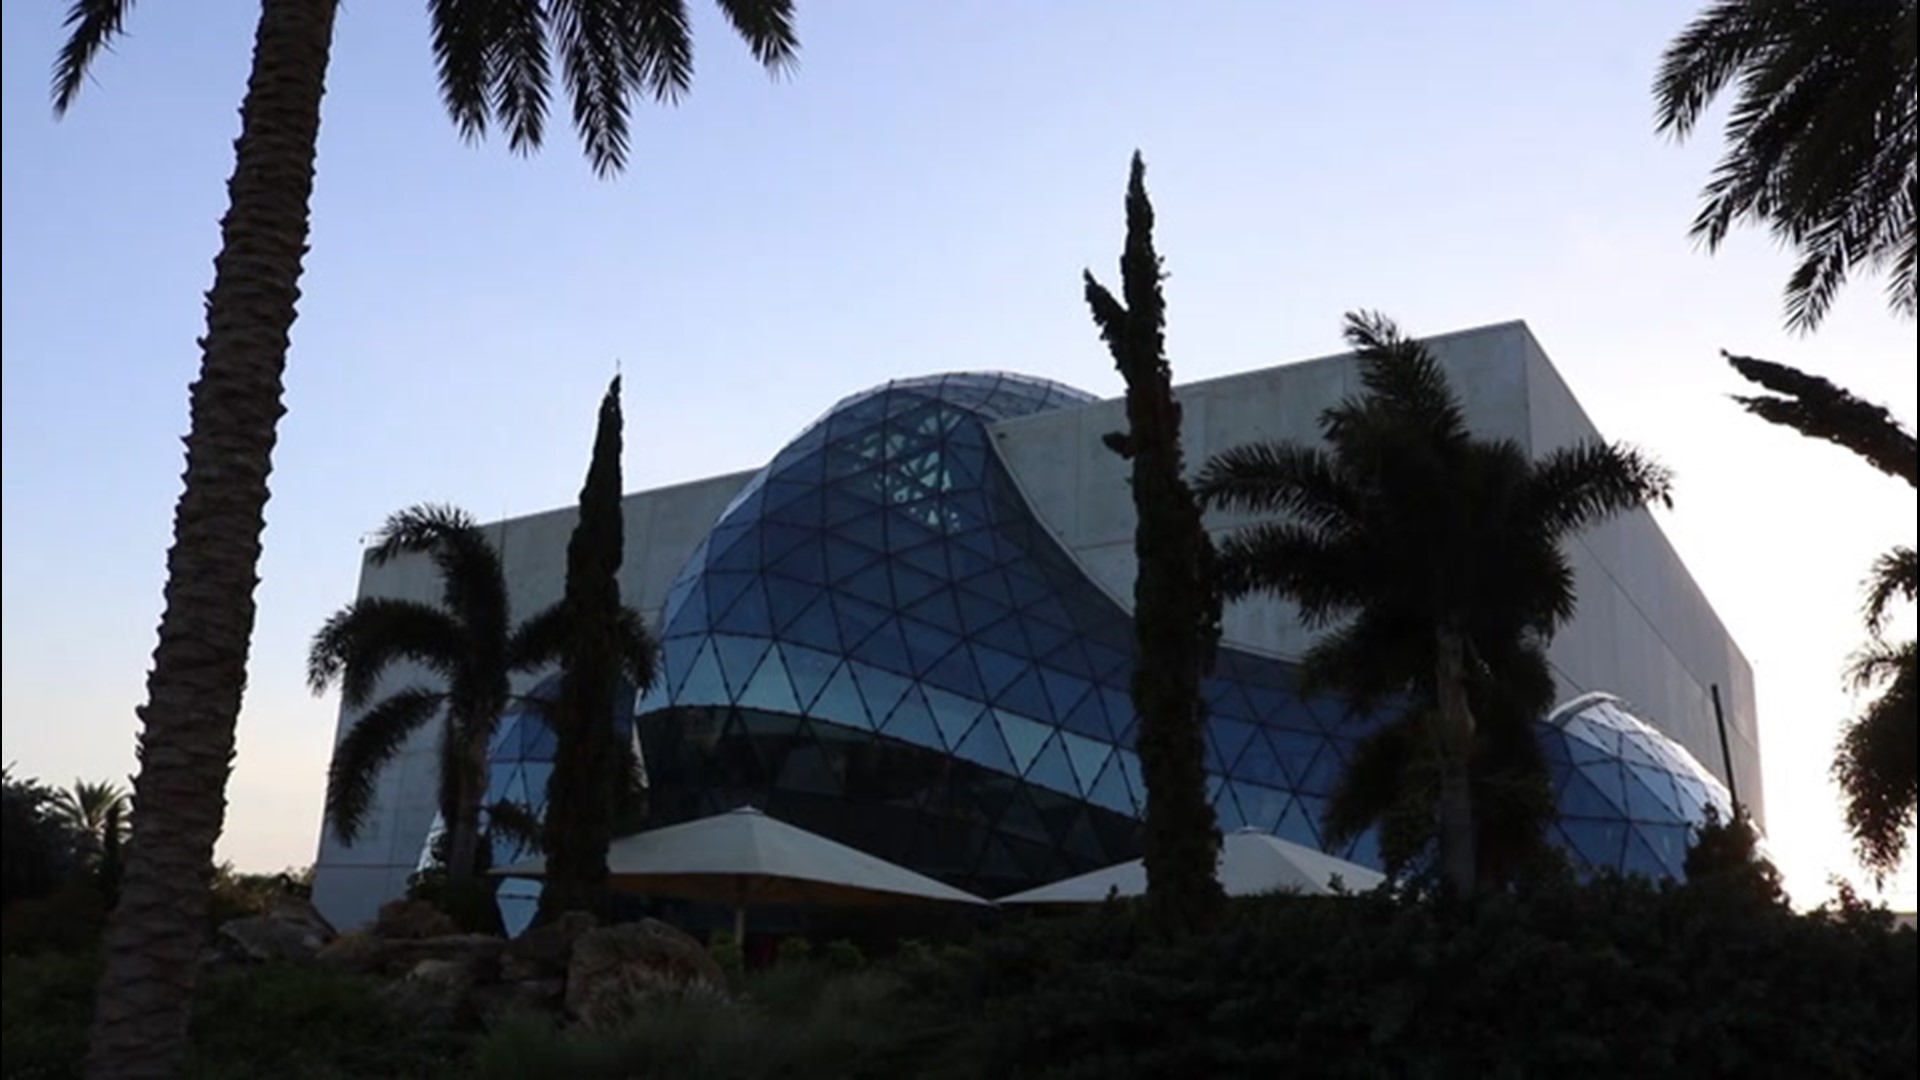 Built in one of the most vulnerable areas to hurricanes in the country, the Dali Museum was built above code to protect priceless works of art inside created by surrealist painter Salvador Dali.